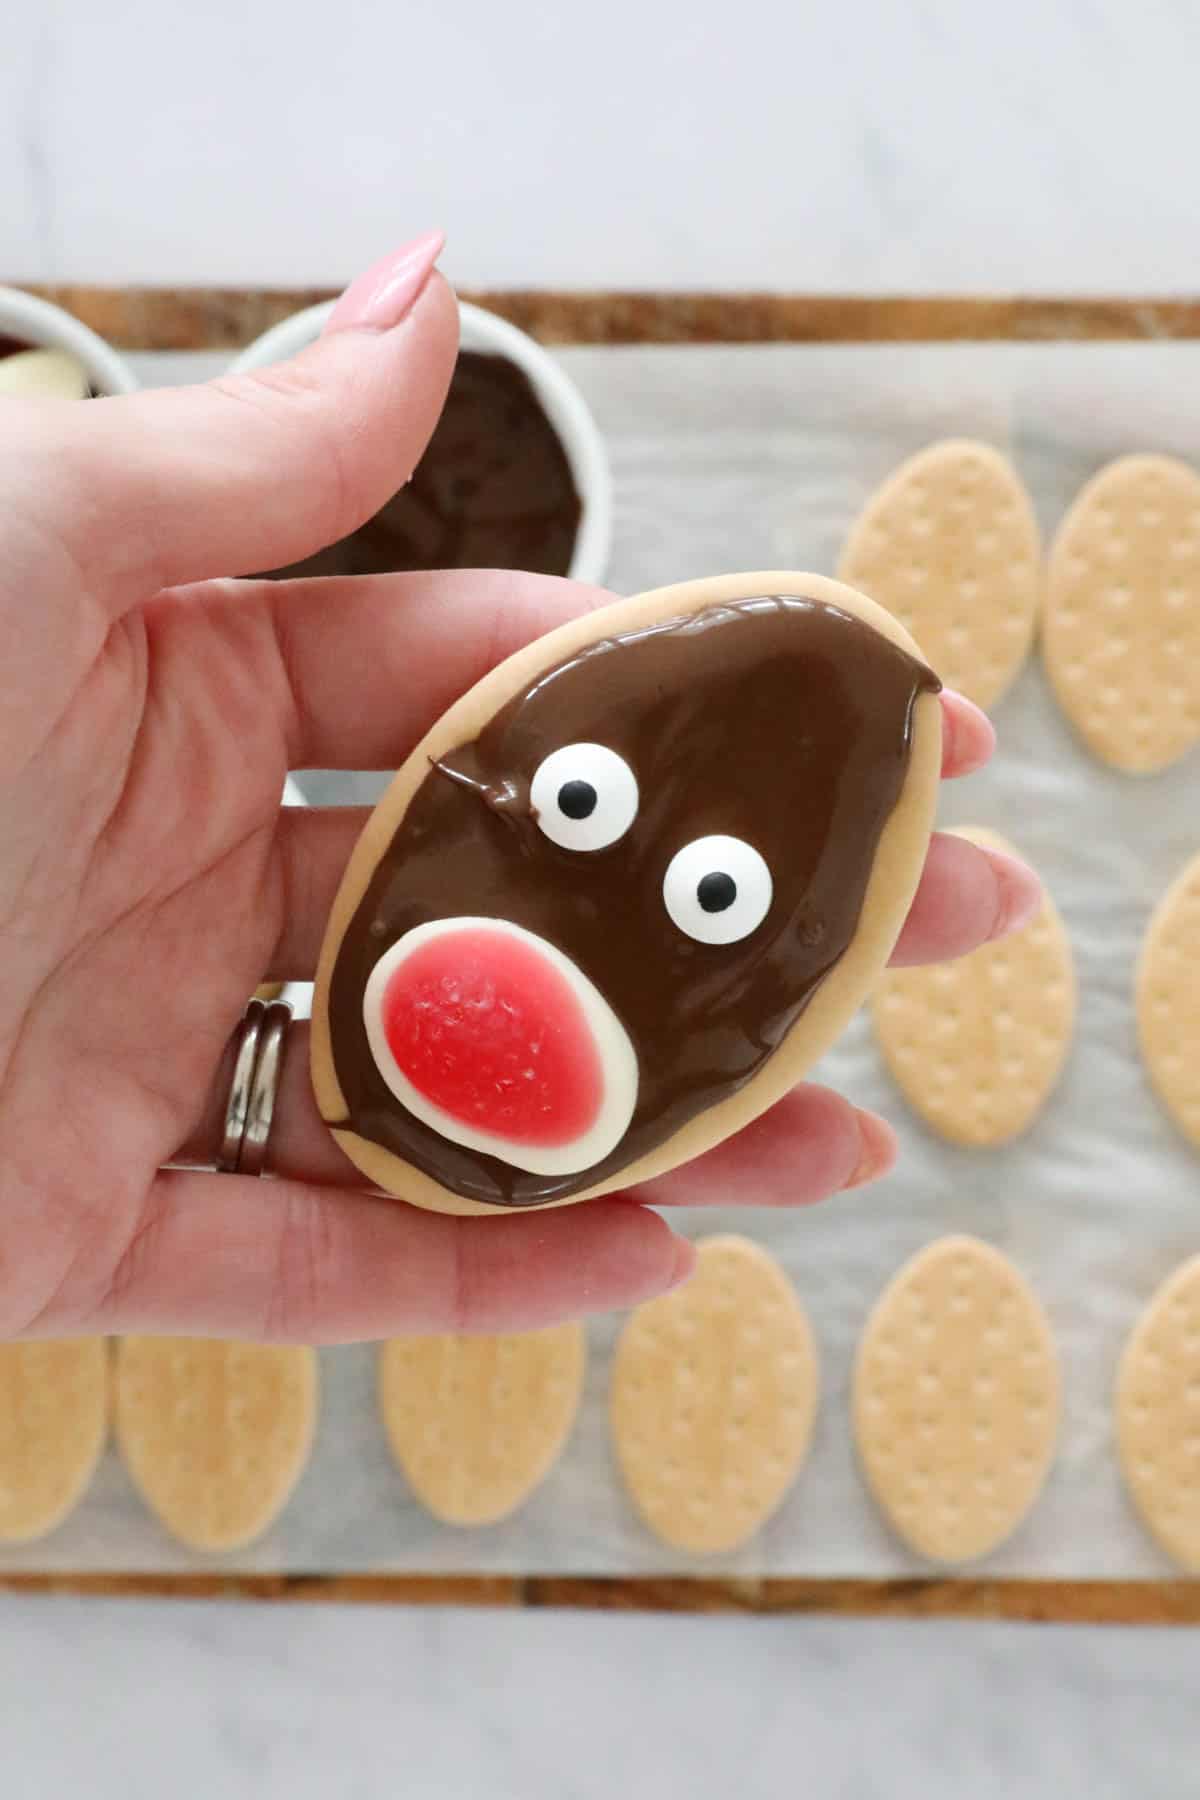 A hand holding a biscuit covered in melted chocolate with two candy eyes and a jelly sweet red nose.